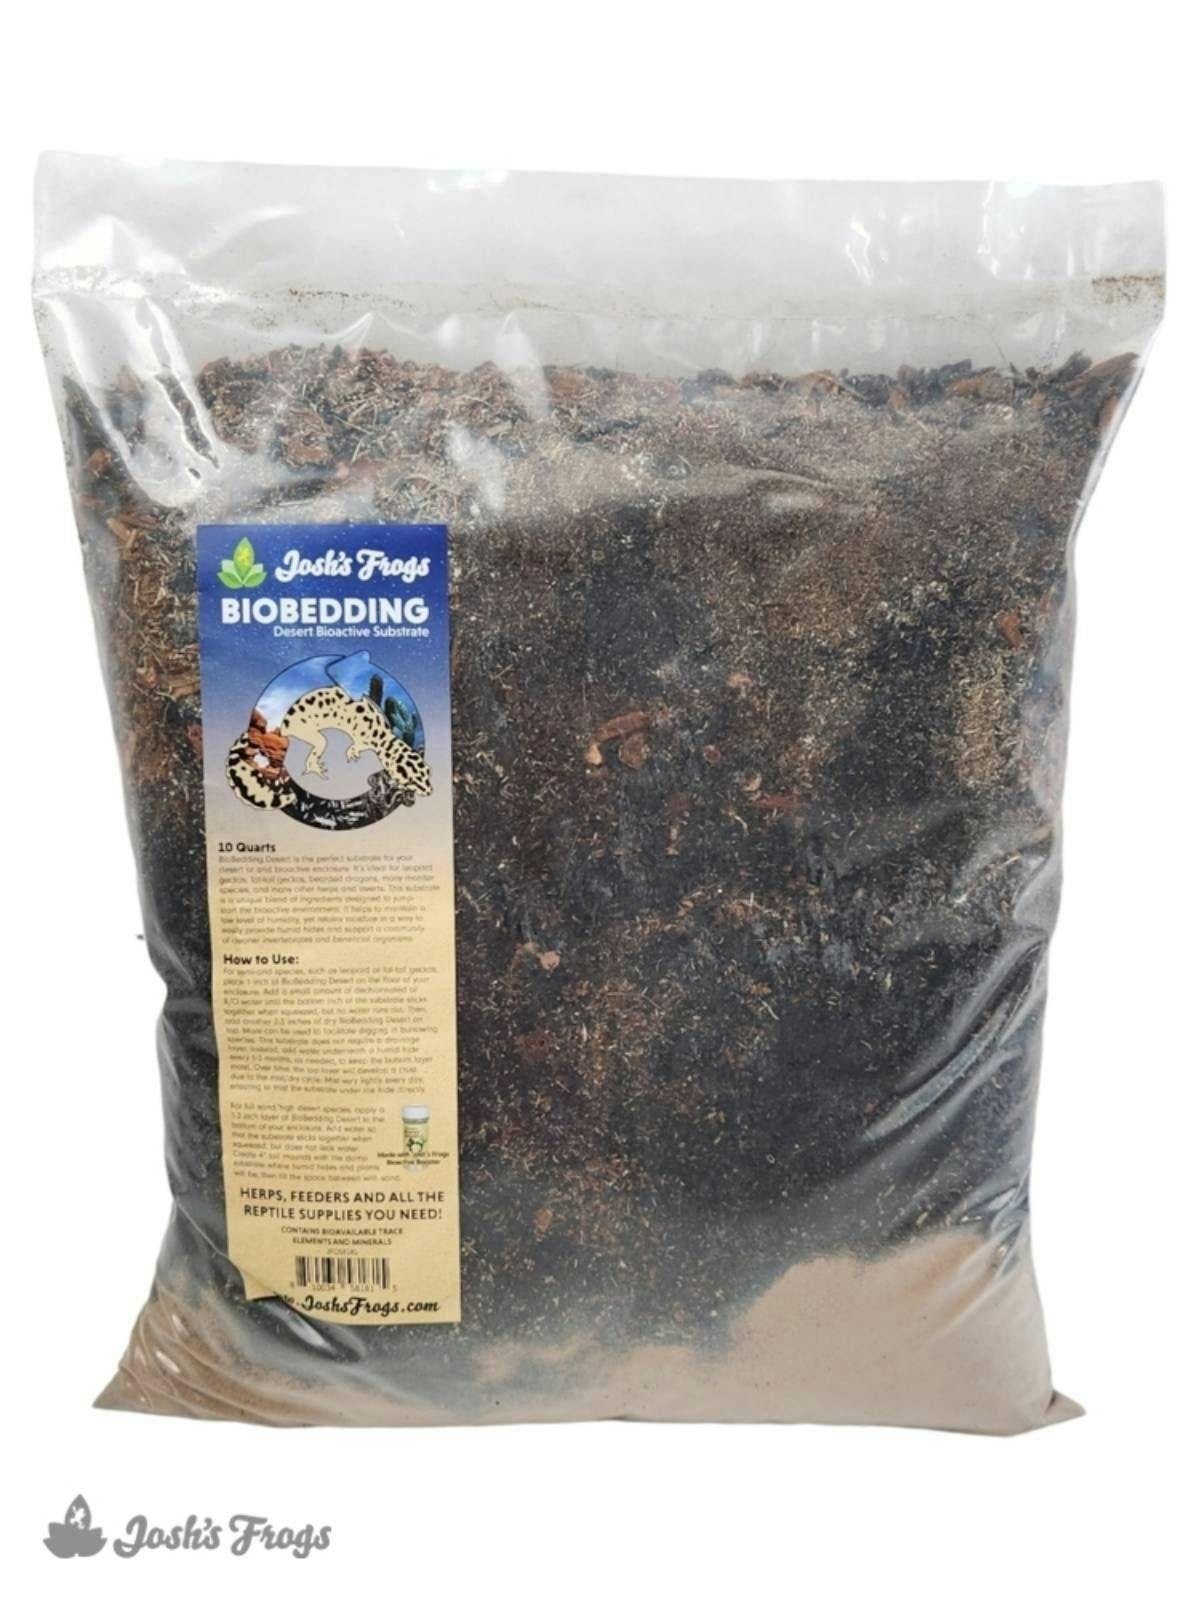 Image for Josh's Frogs BioBedding Desert Bioactive Substrate (10 quarts) by Josh's Frogs